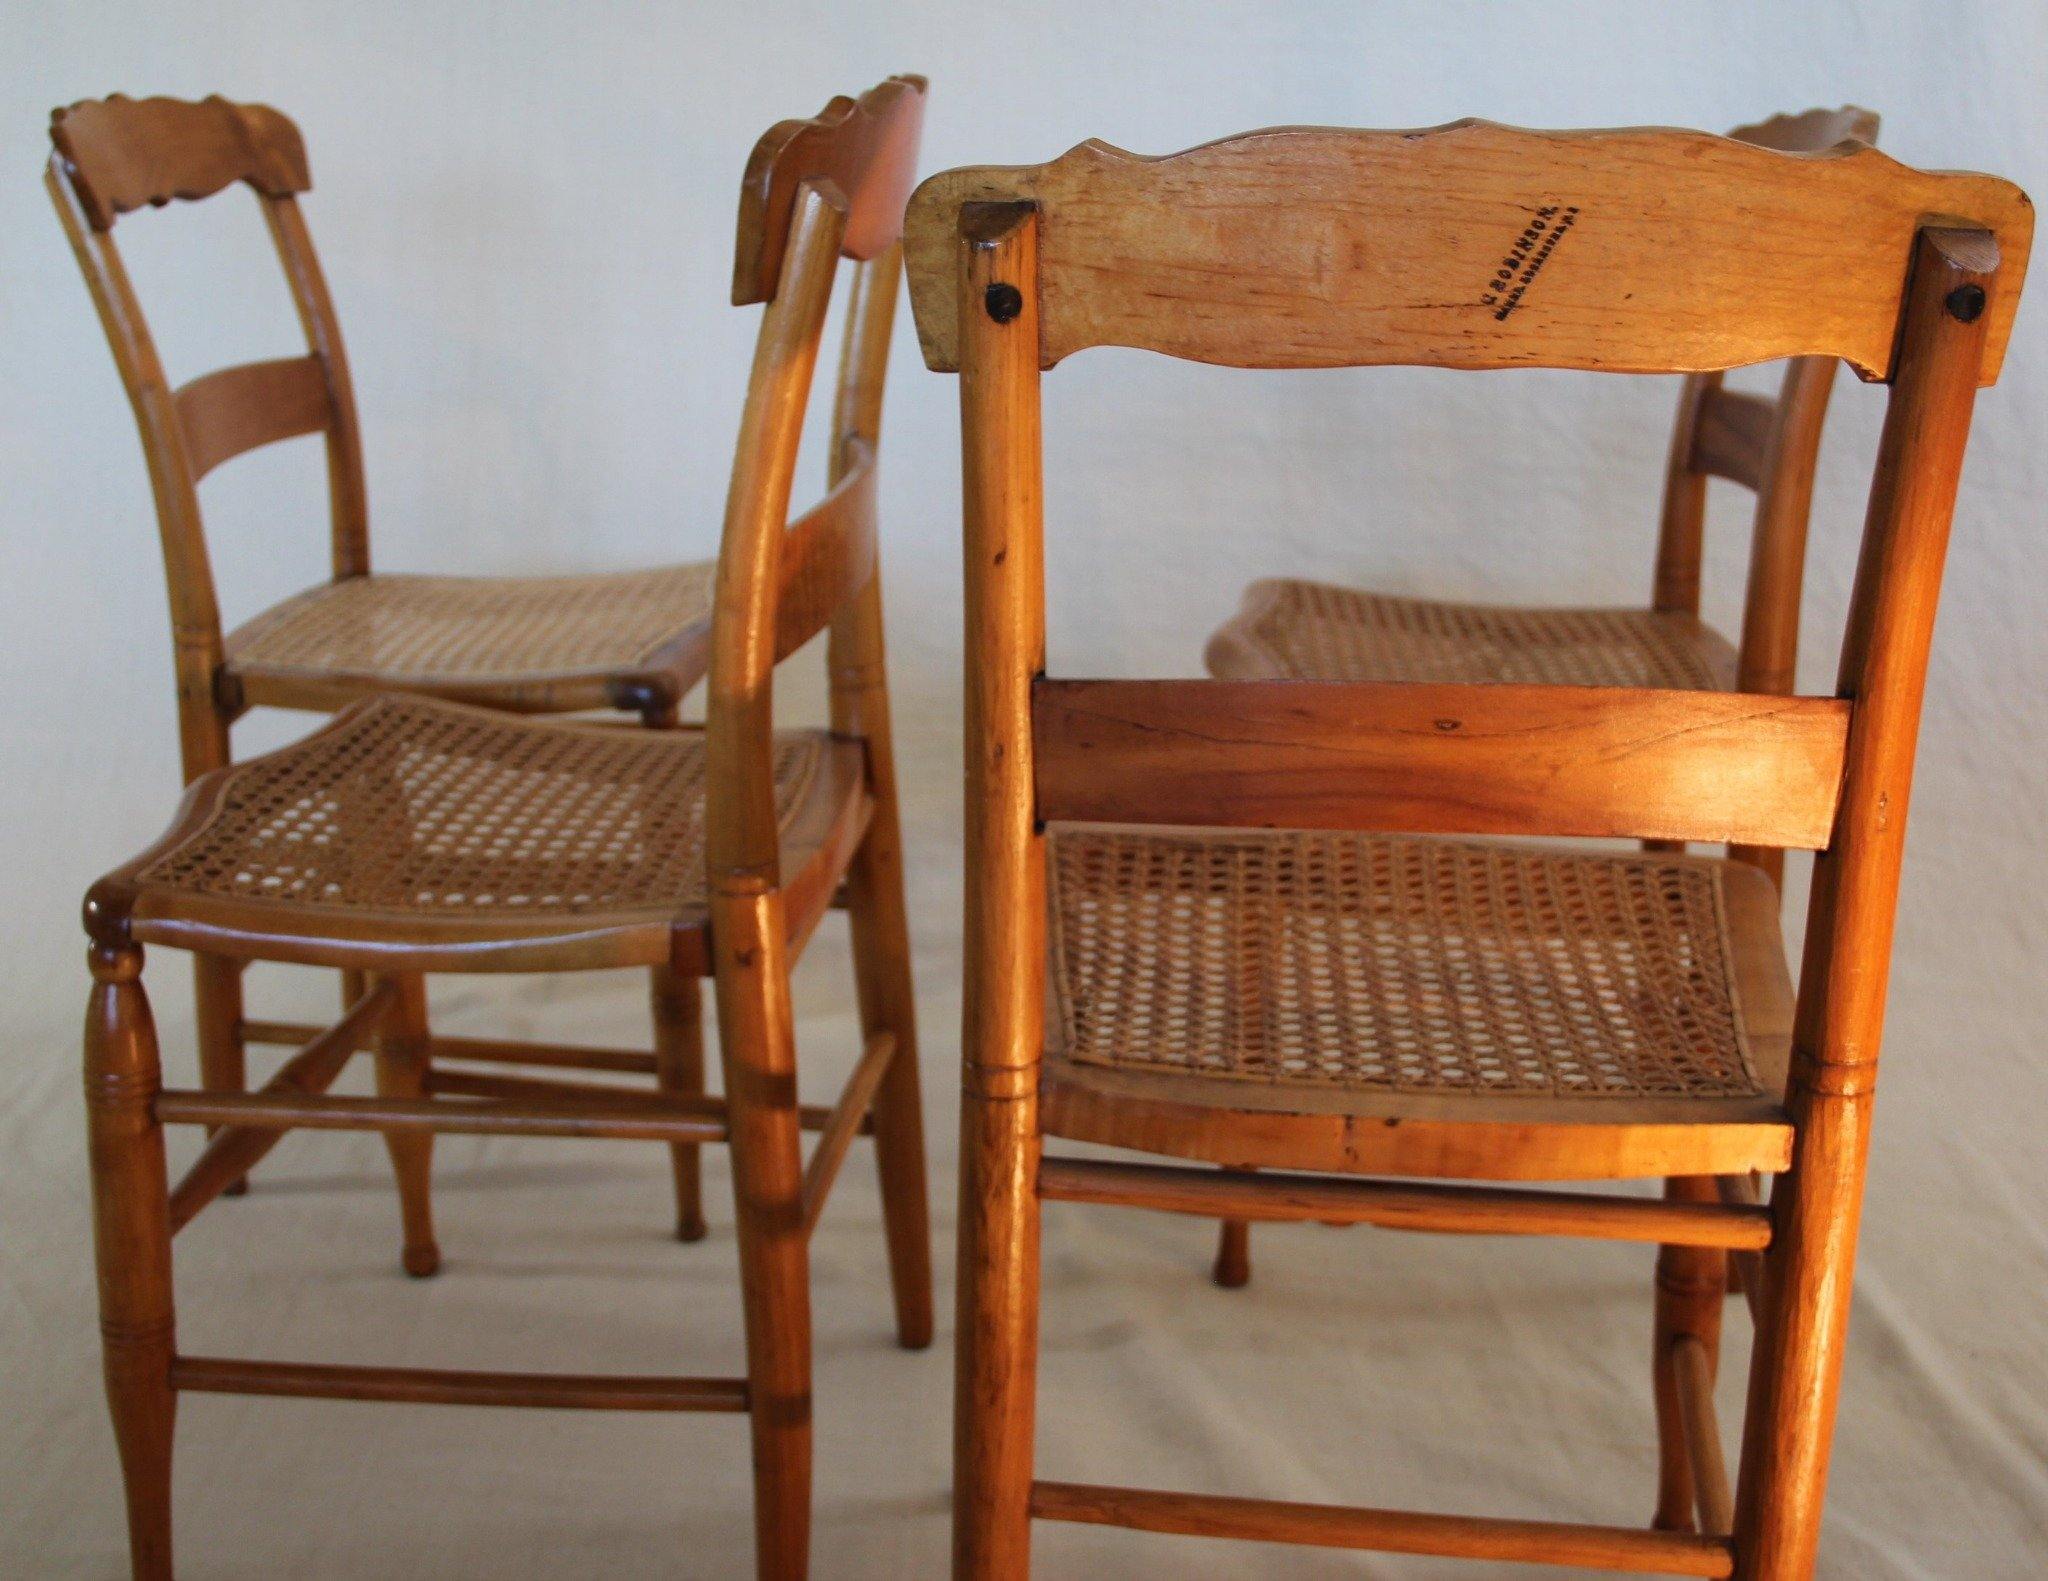 Back View of Pine Chairs with Cane seat